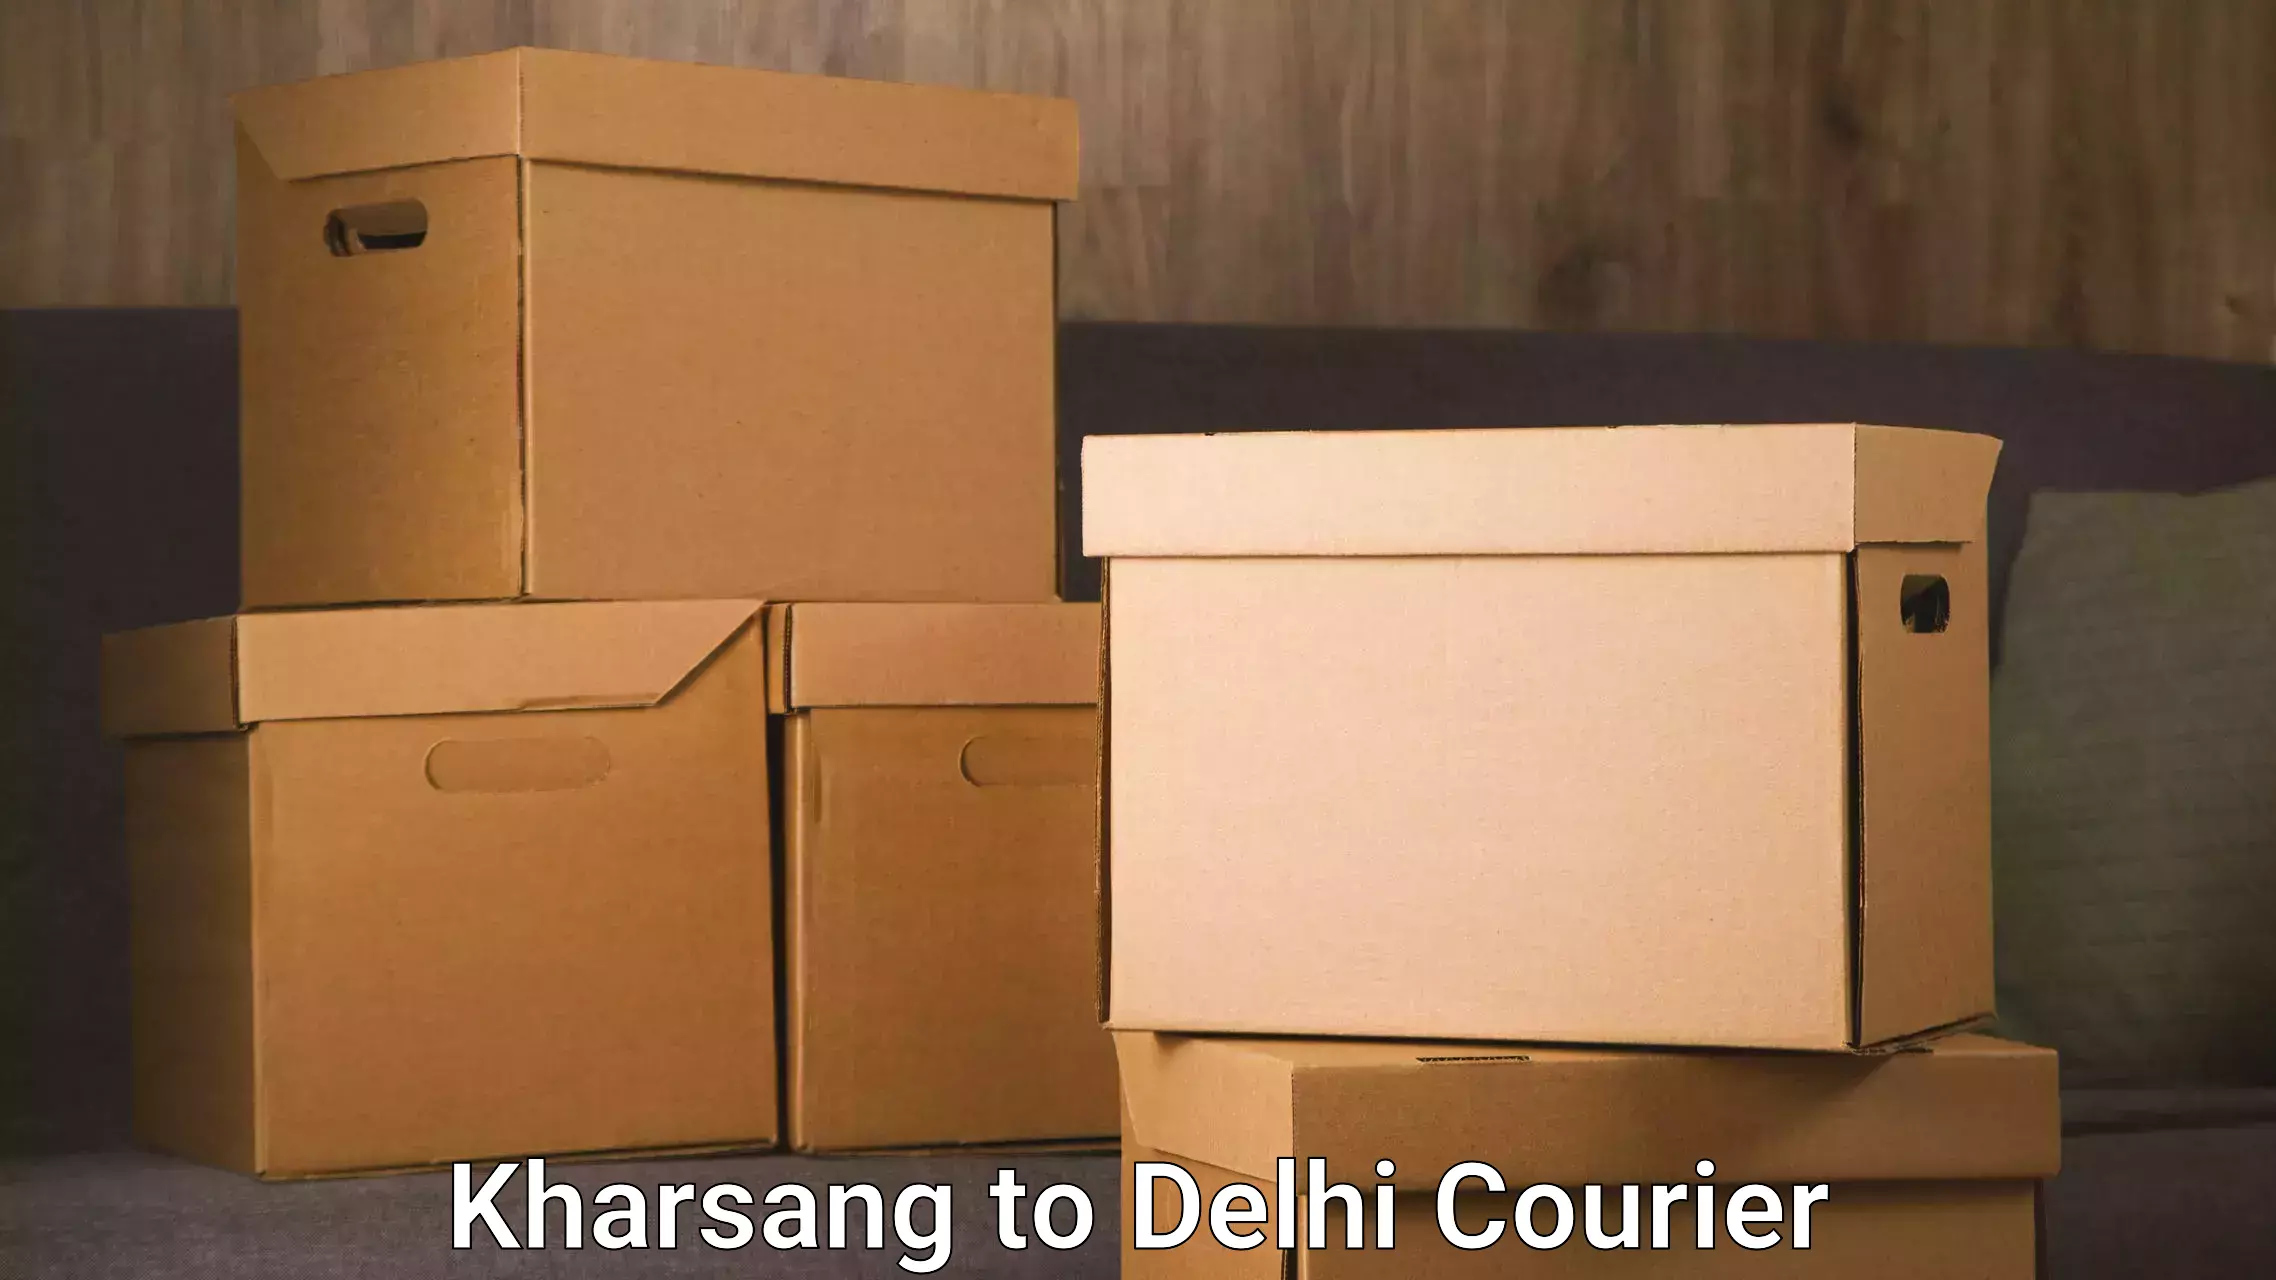 Delivery service partnership in Kharsang to Delhi